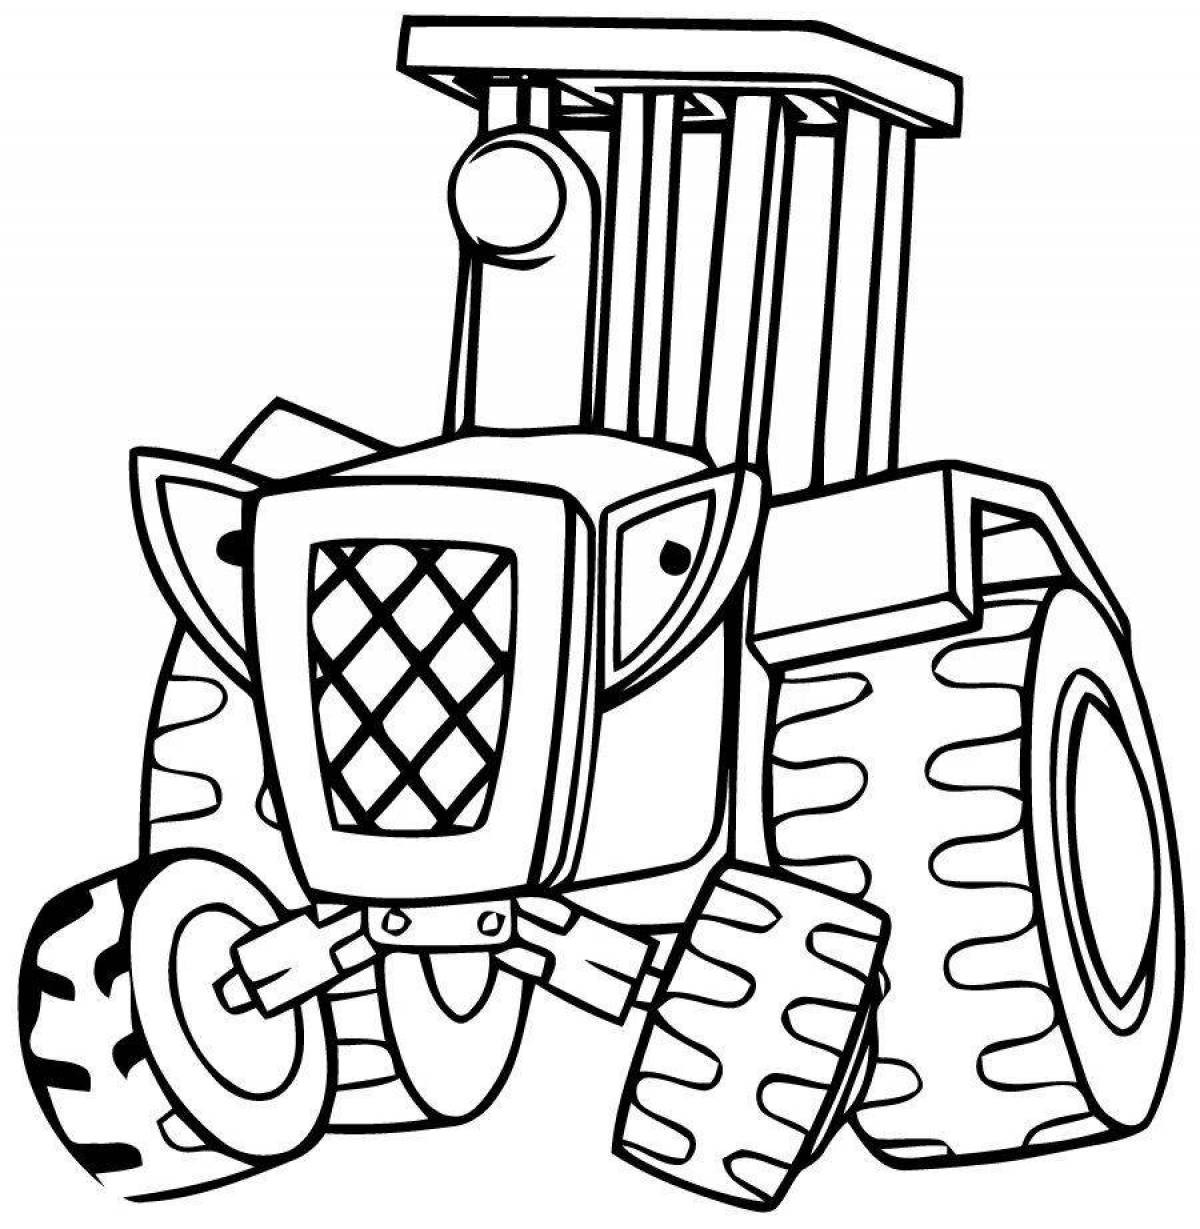 Coloring animated tractor with barrel